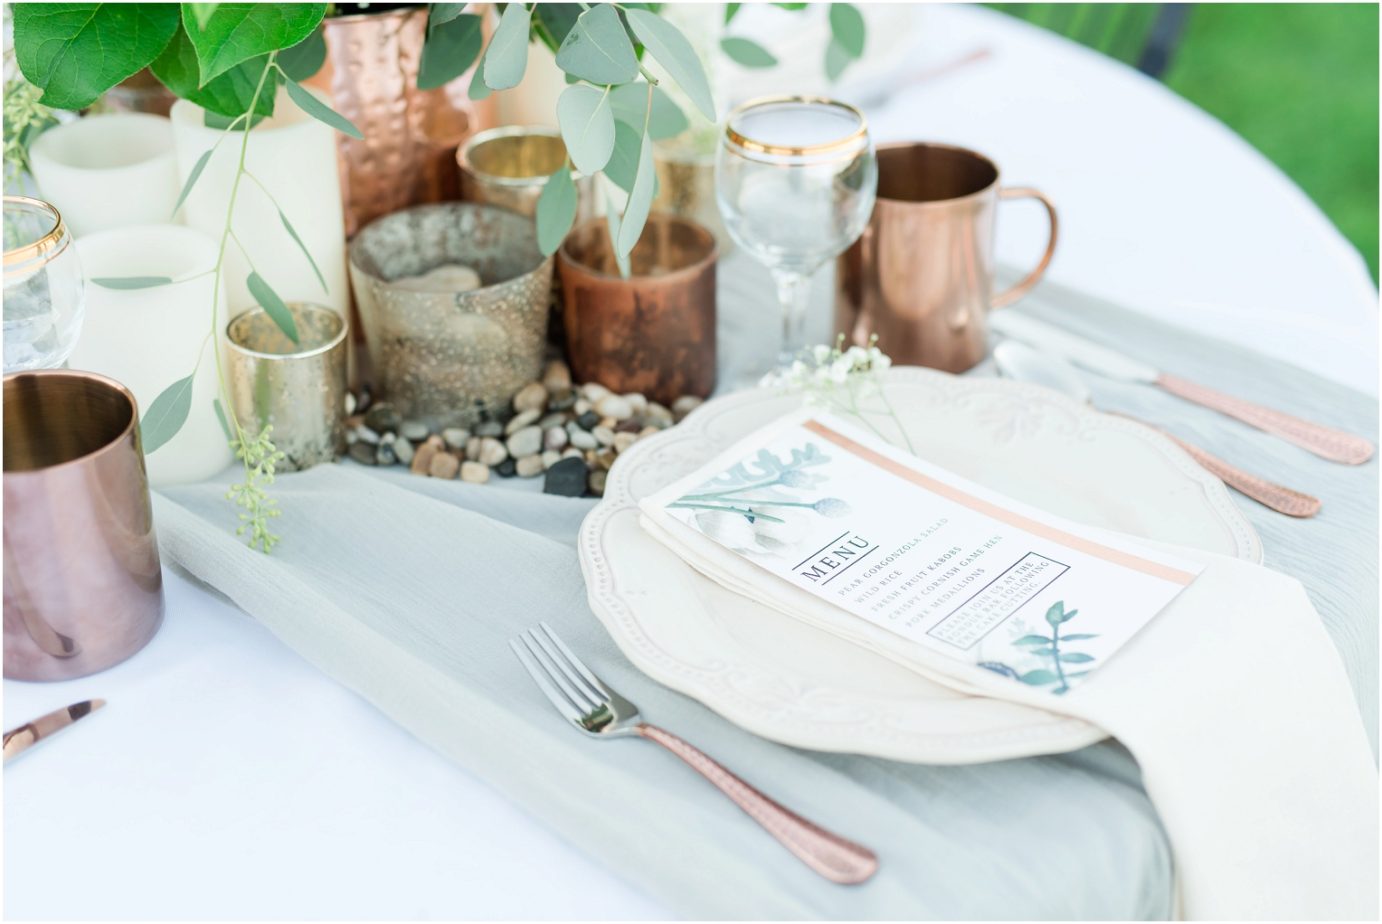 Chandler Reach Wedding Moscow Mule Inspiration Shoot Tablescape for four